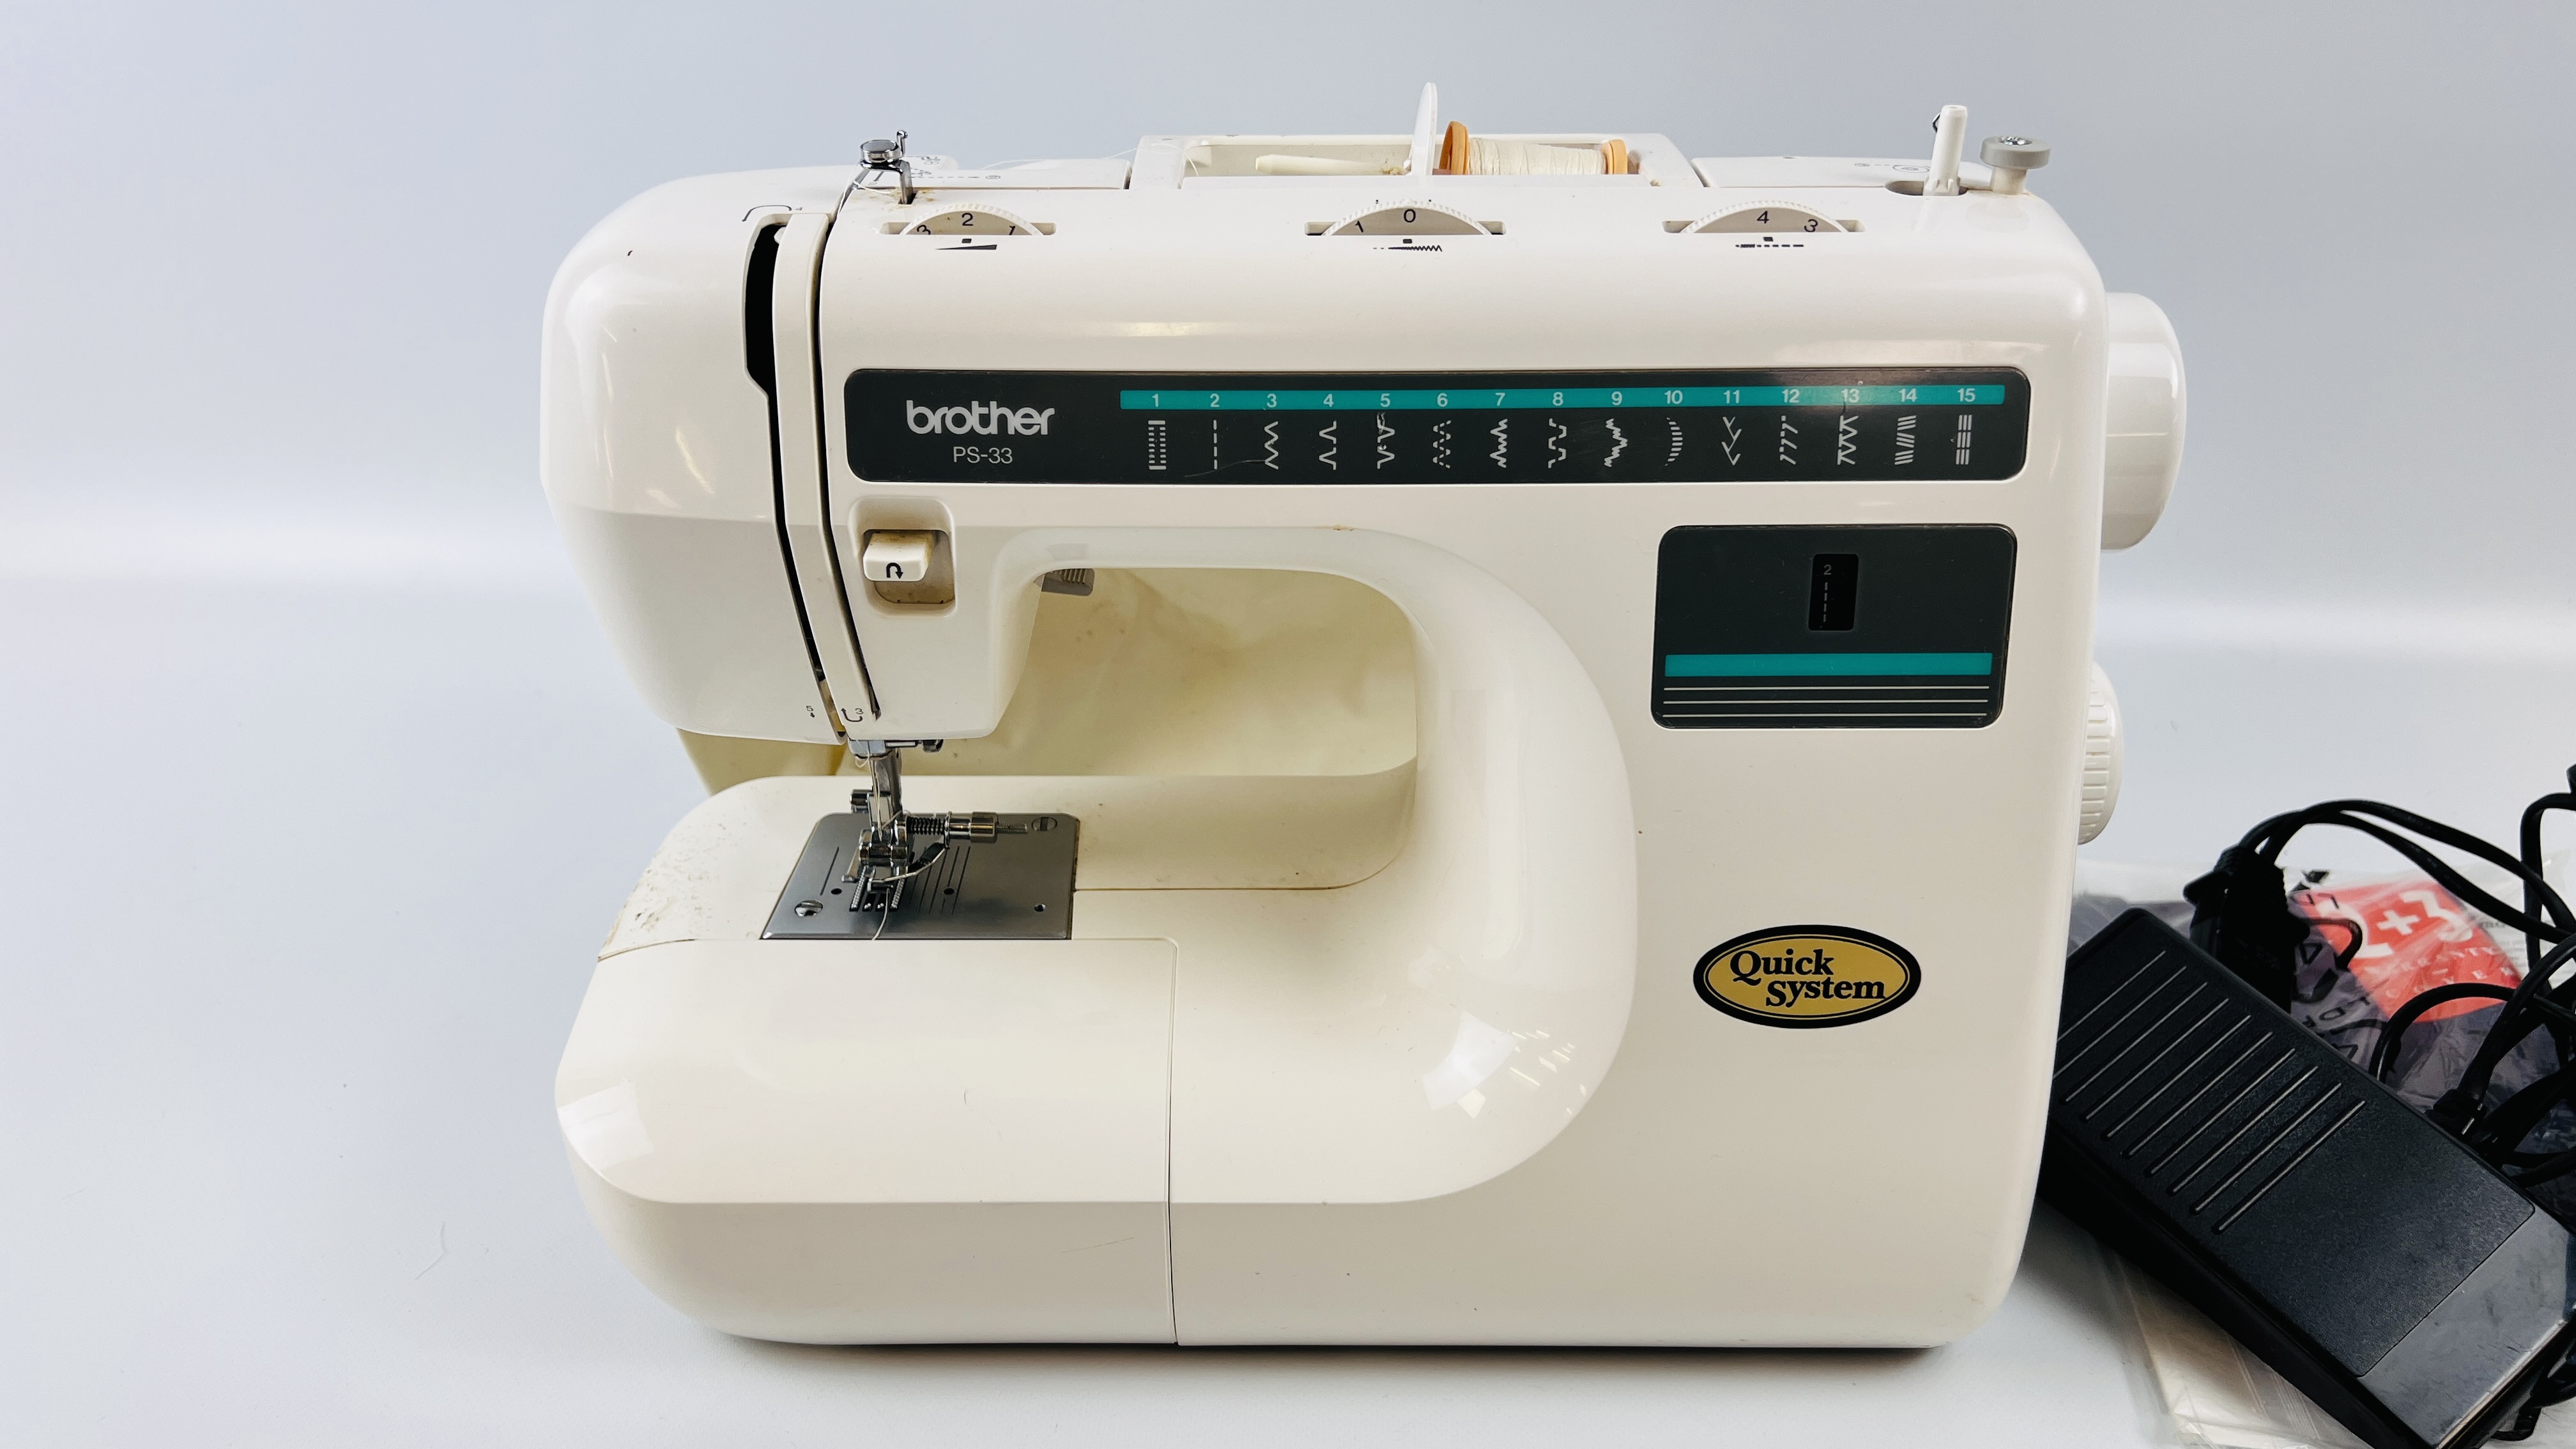 BROTHER PS-33 ELECTRIC QUICK SYSTEM SEWING MACHINE WITH FOOT PEDAL AND INSTRUCTIONS - SOLD AS SEEN. - Image 2 of 6